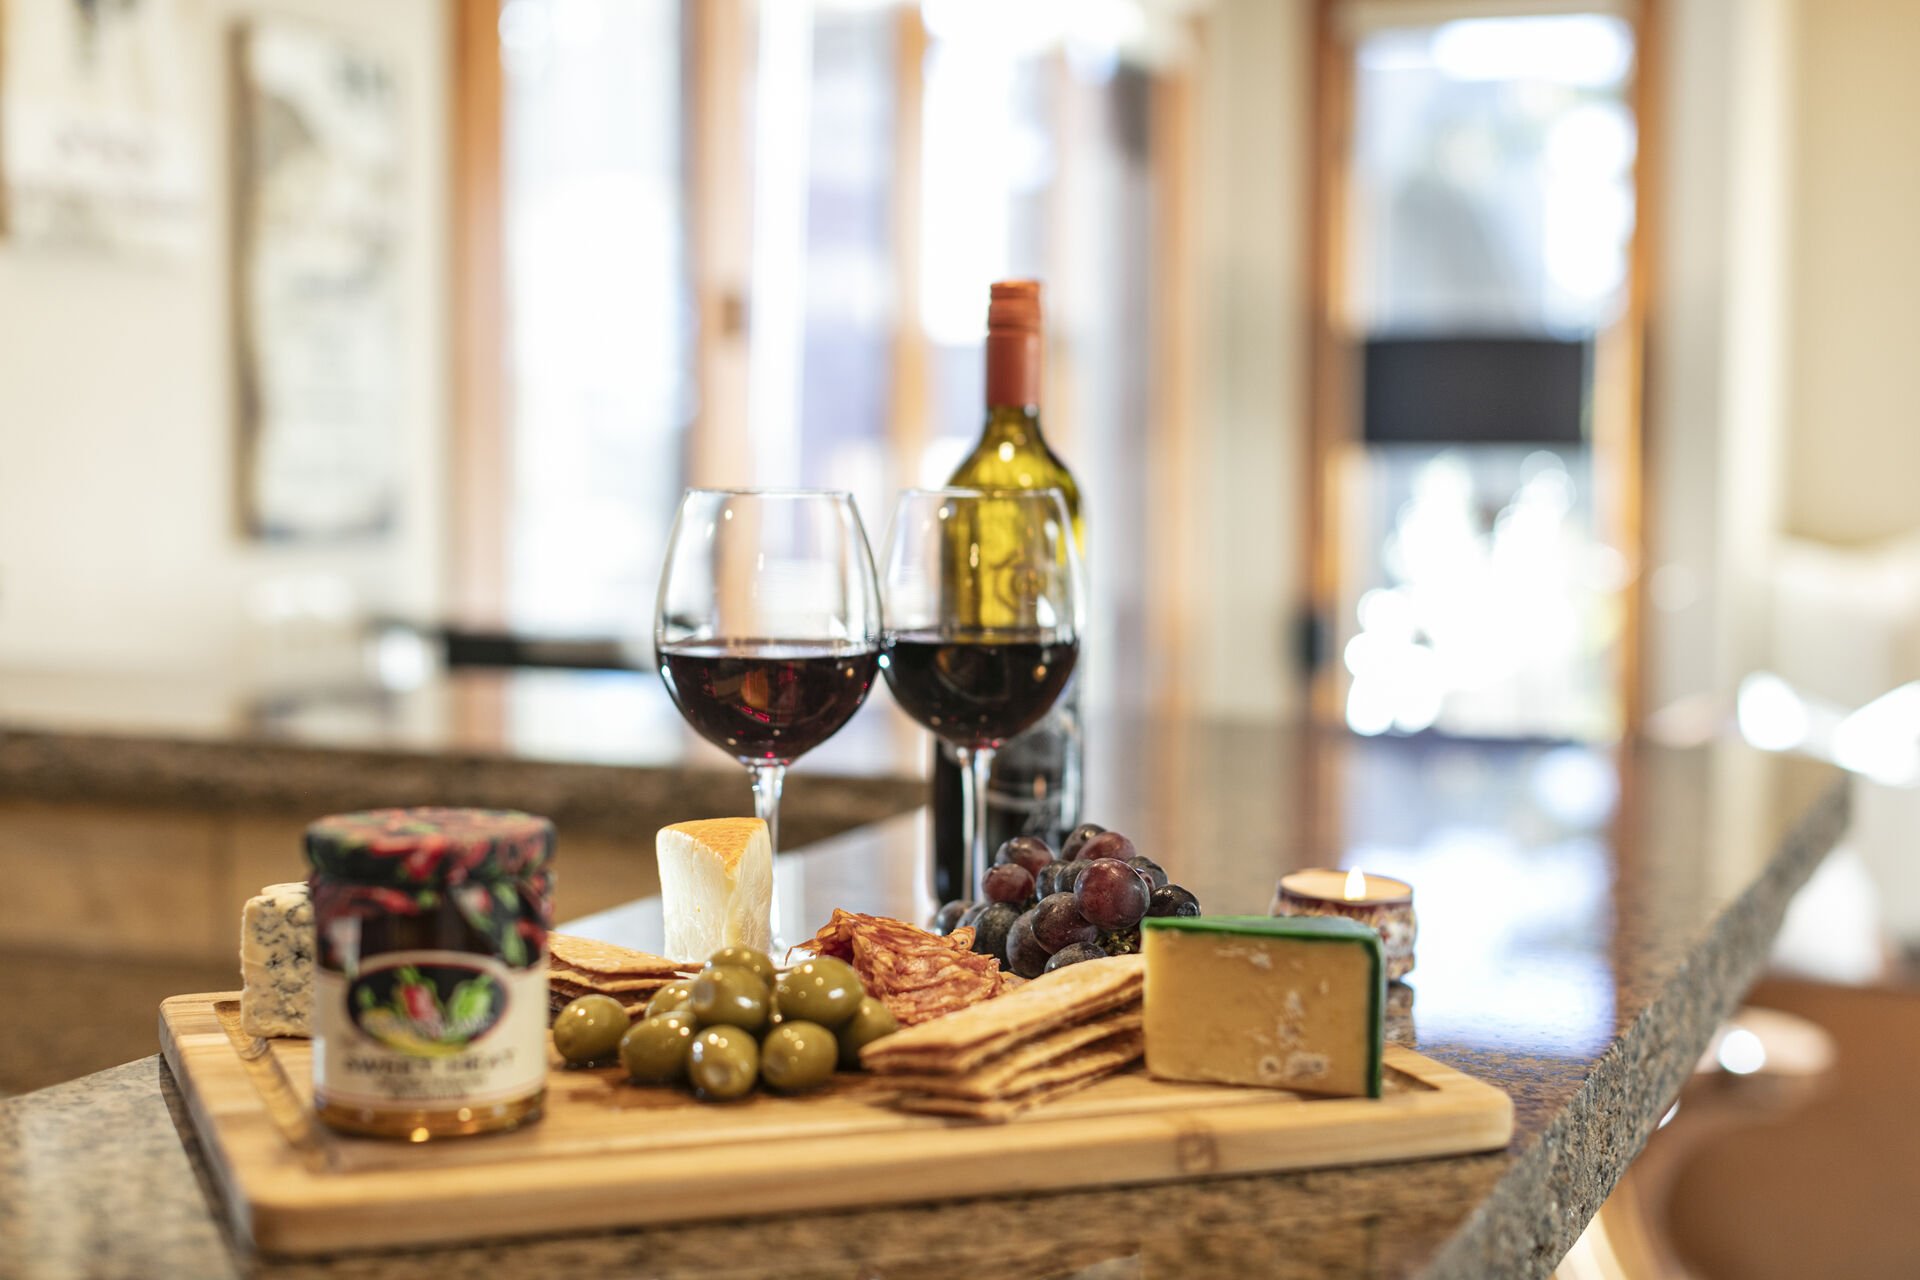 Entertain with wine and cheese at the end of the day!